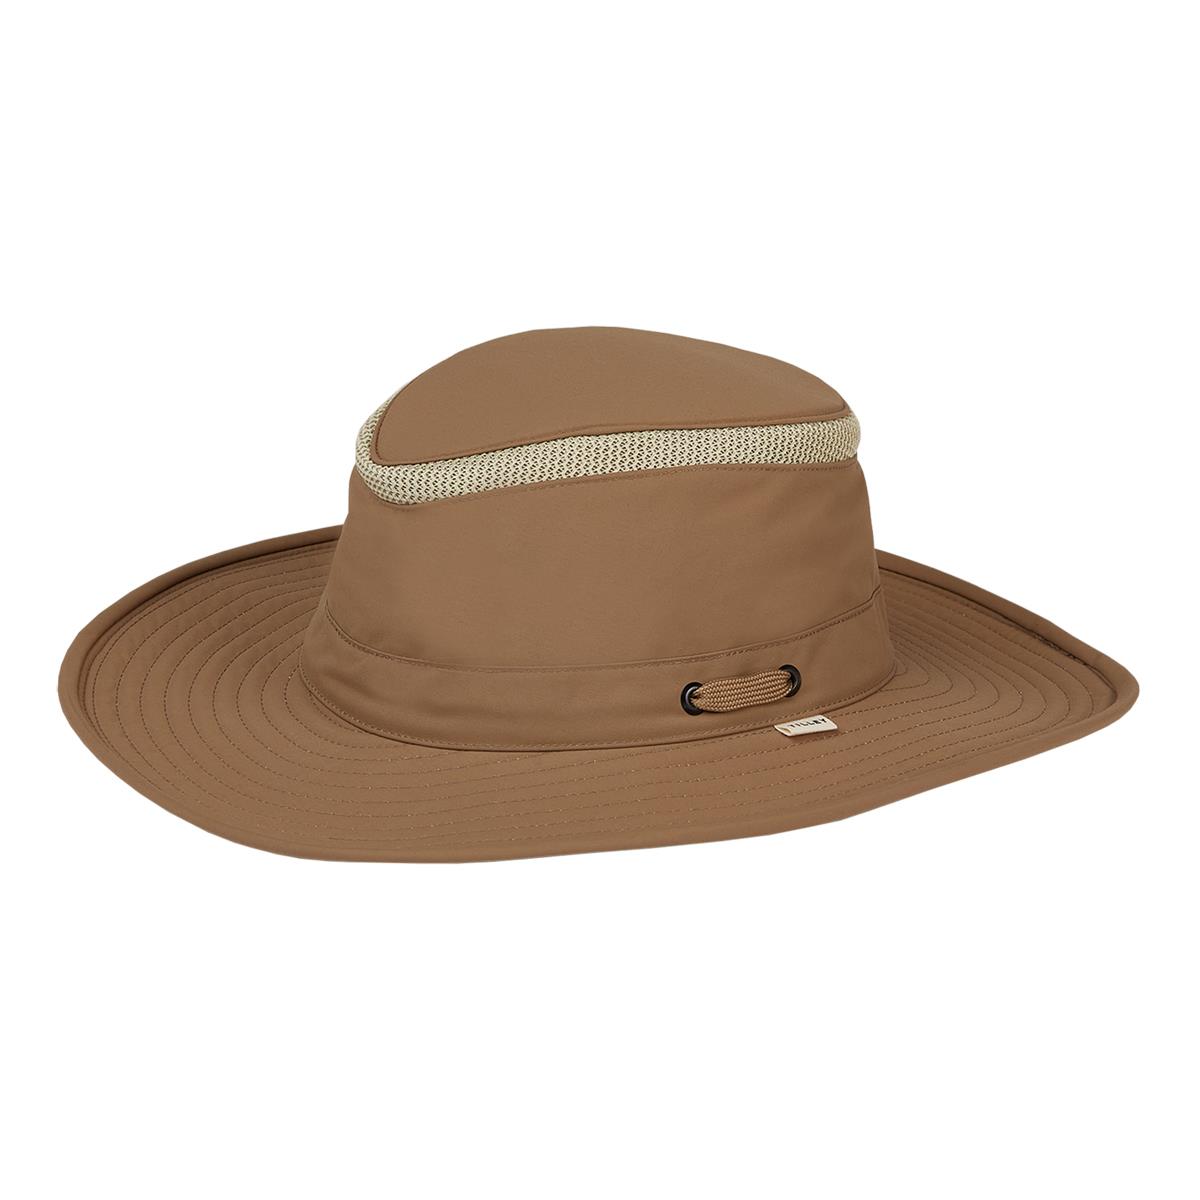 What is the warranty for the Tilley Airflo Hat?